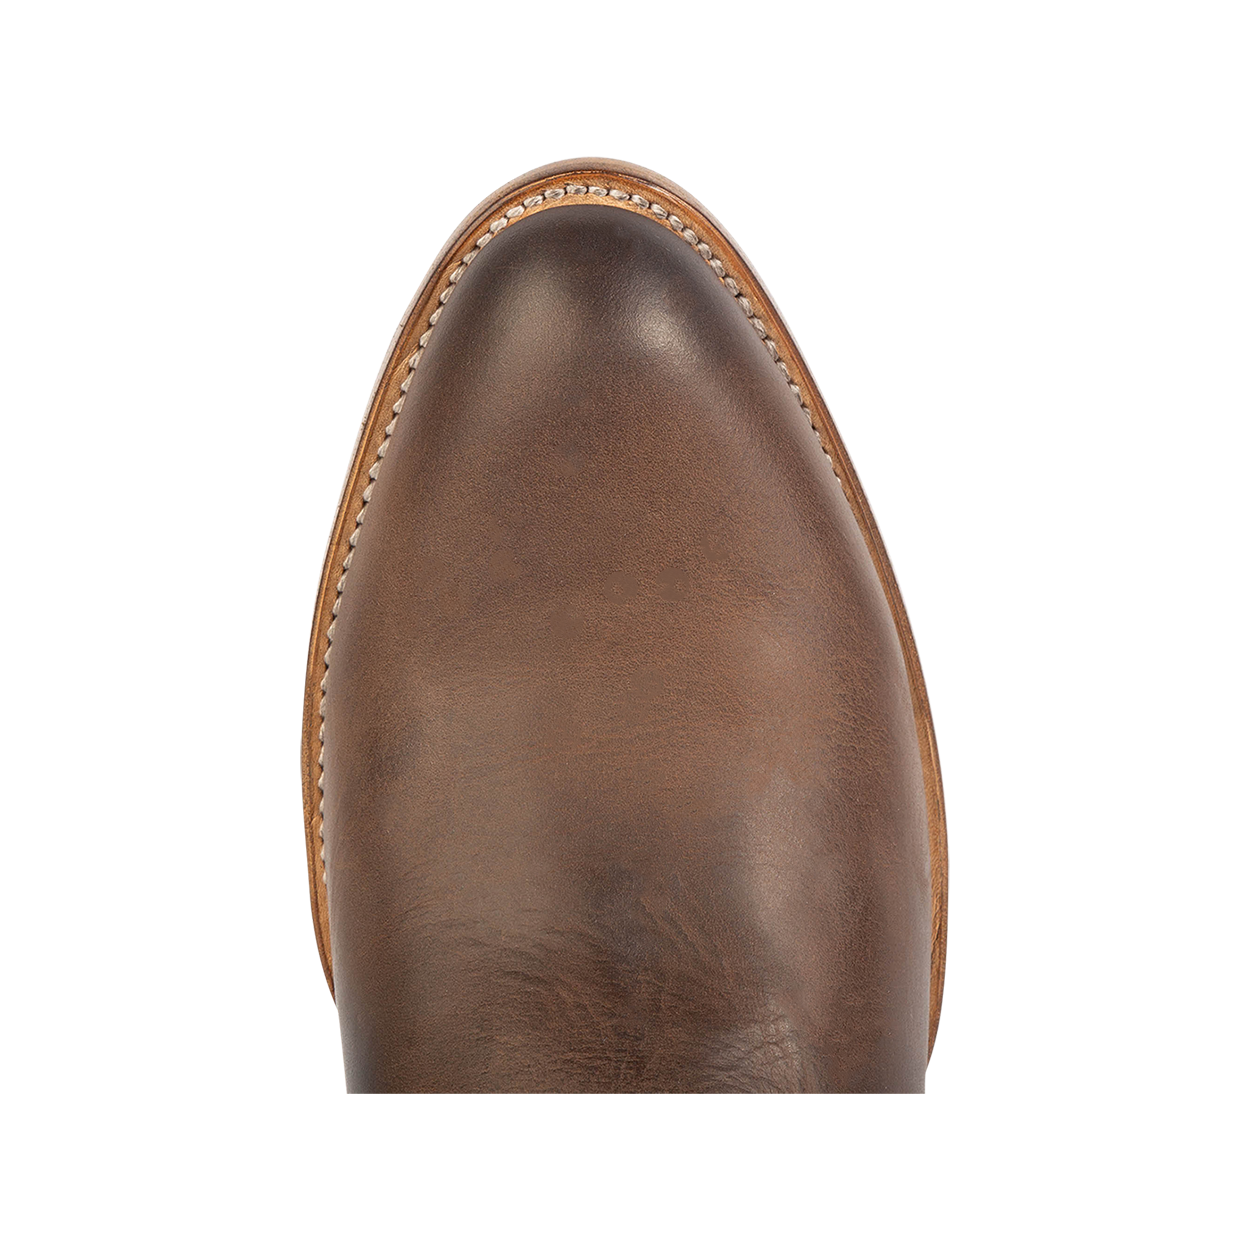 Top view showing traditional toe shape on FREEBIRD men's Henderson brown leather mid calf boot